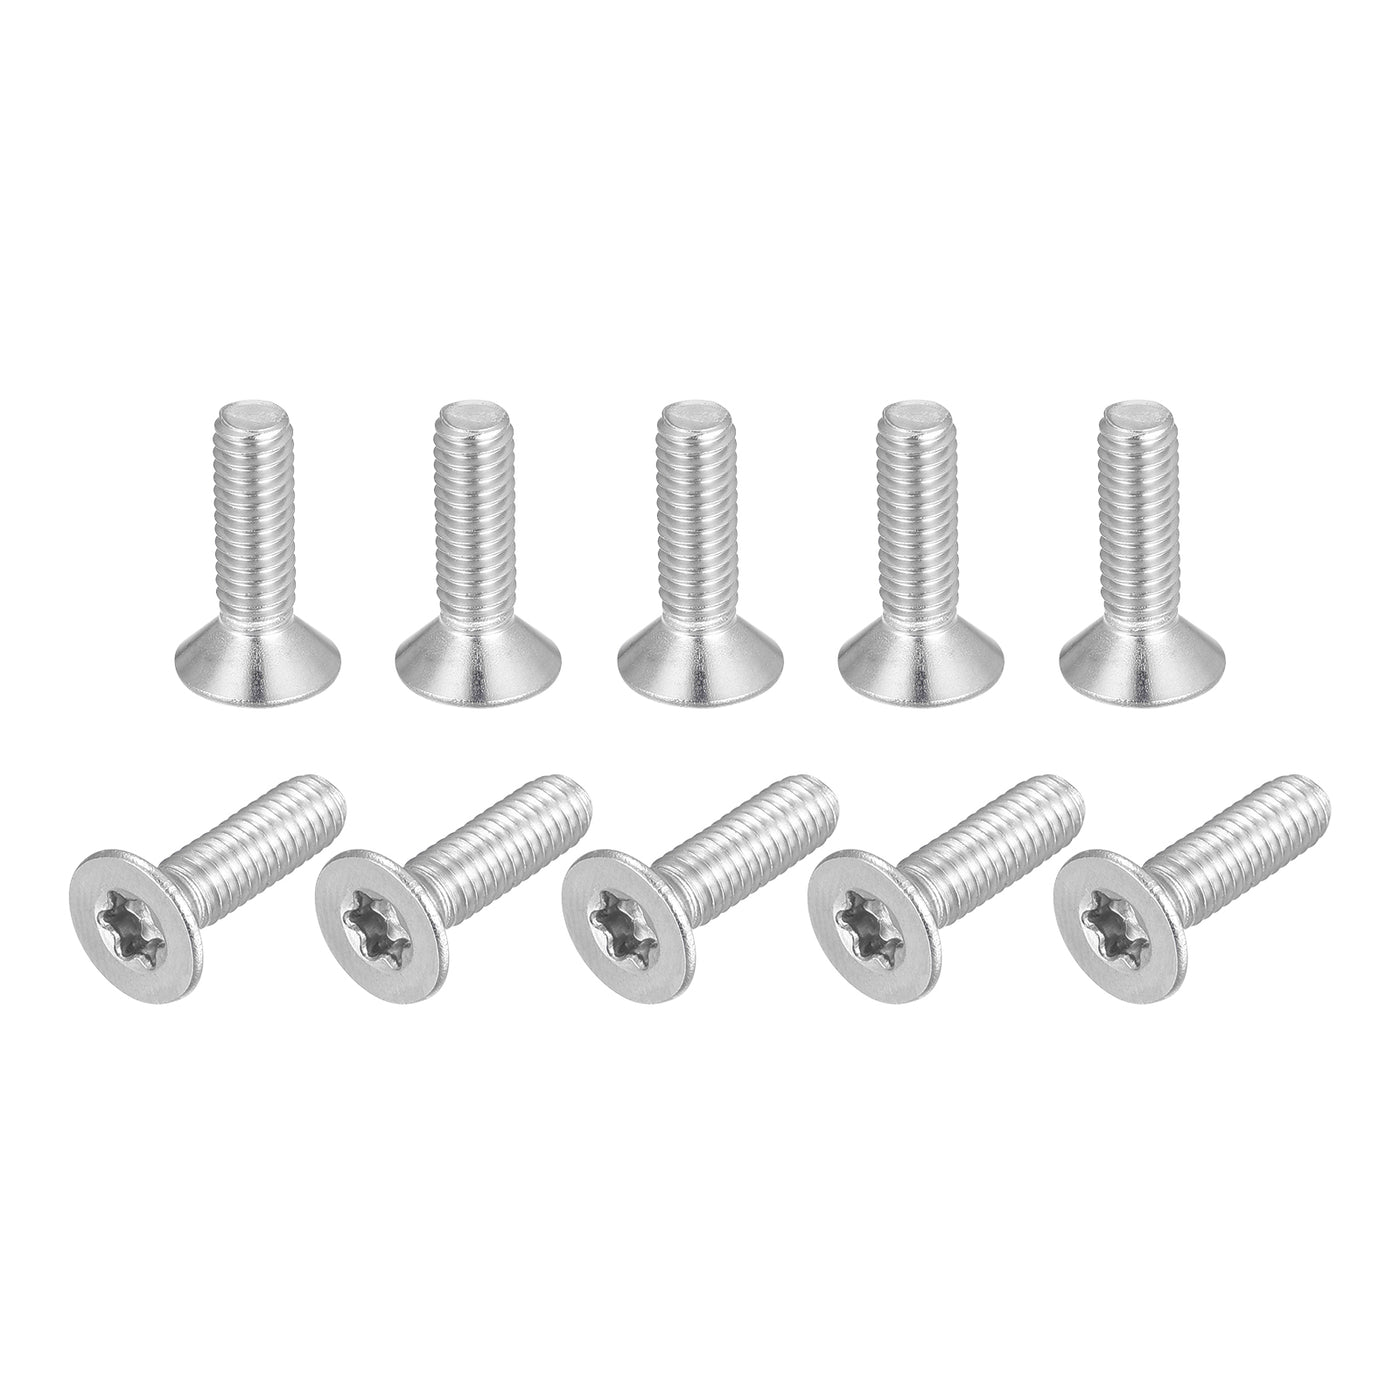 uxcell Uxcell M4x14mm Torx Security Screws, 10pcs 316 Stainless Steel Countersunk Head Screw